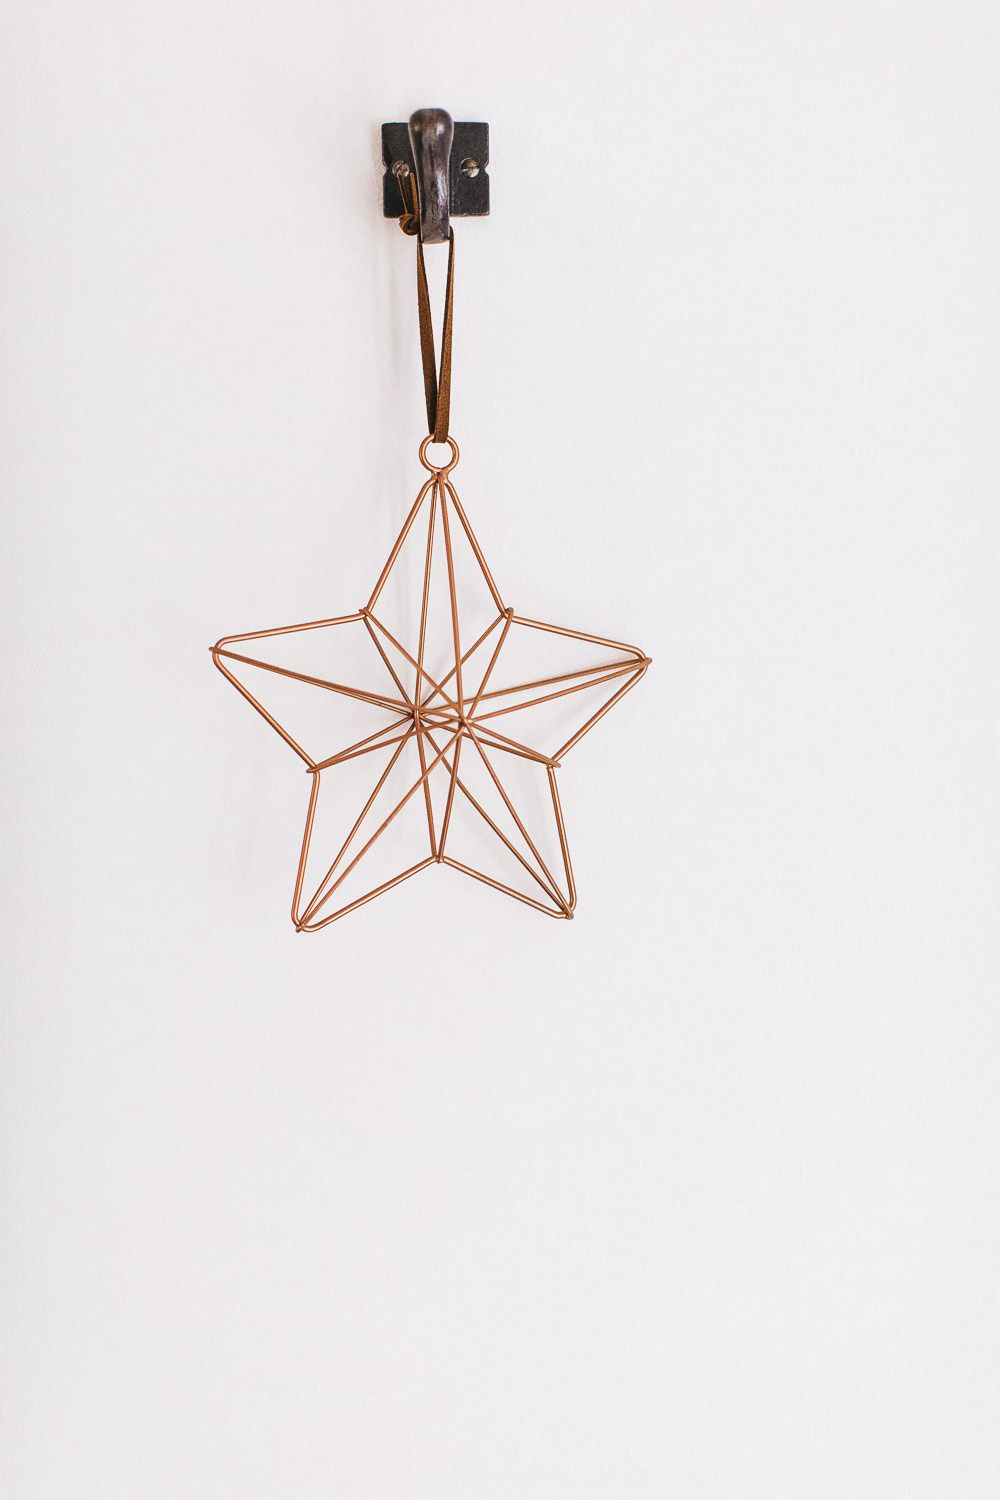 Copper Star from Chatsworth Stable Shop